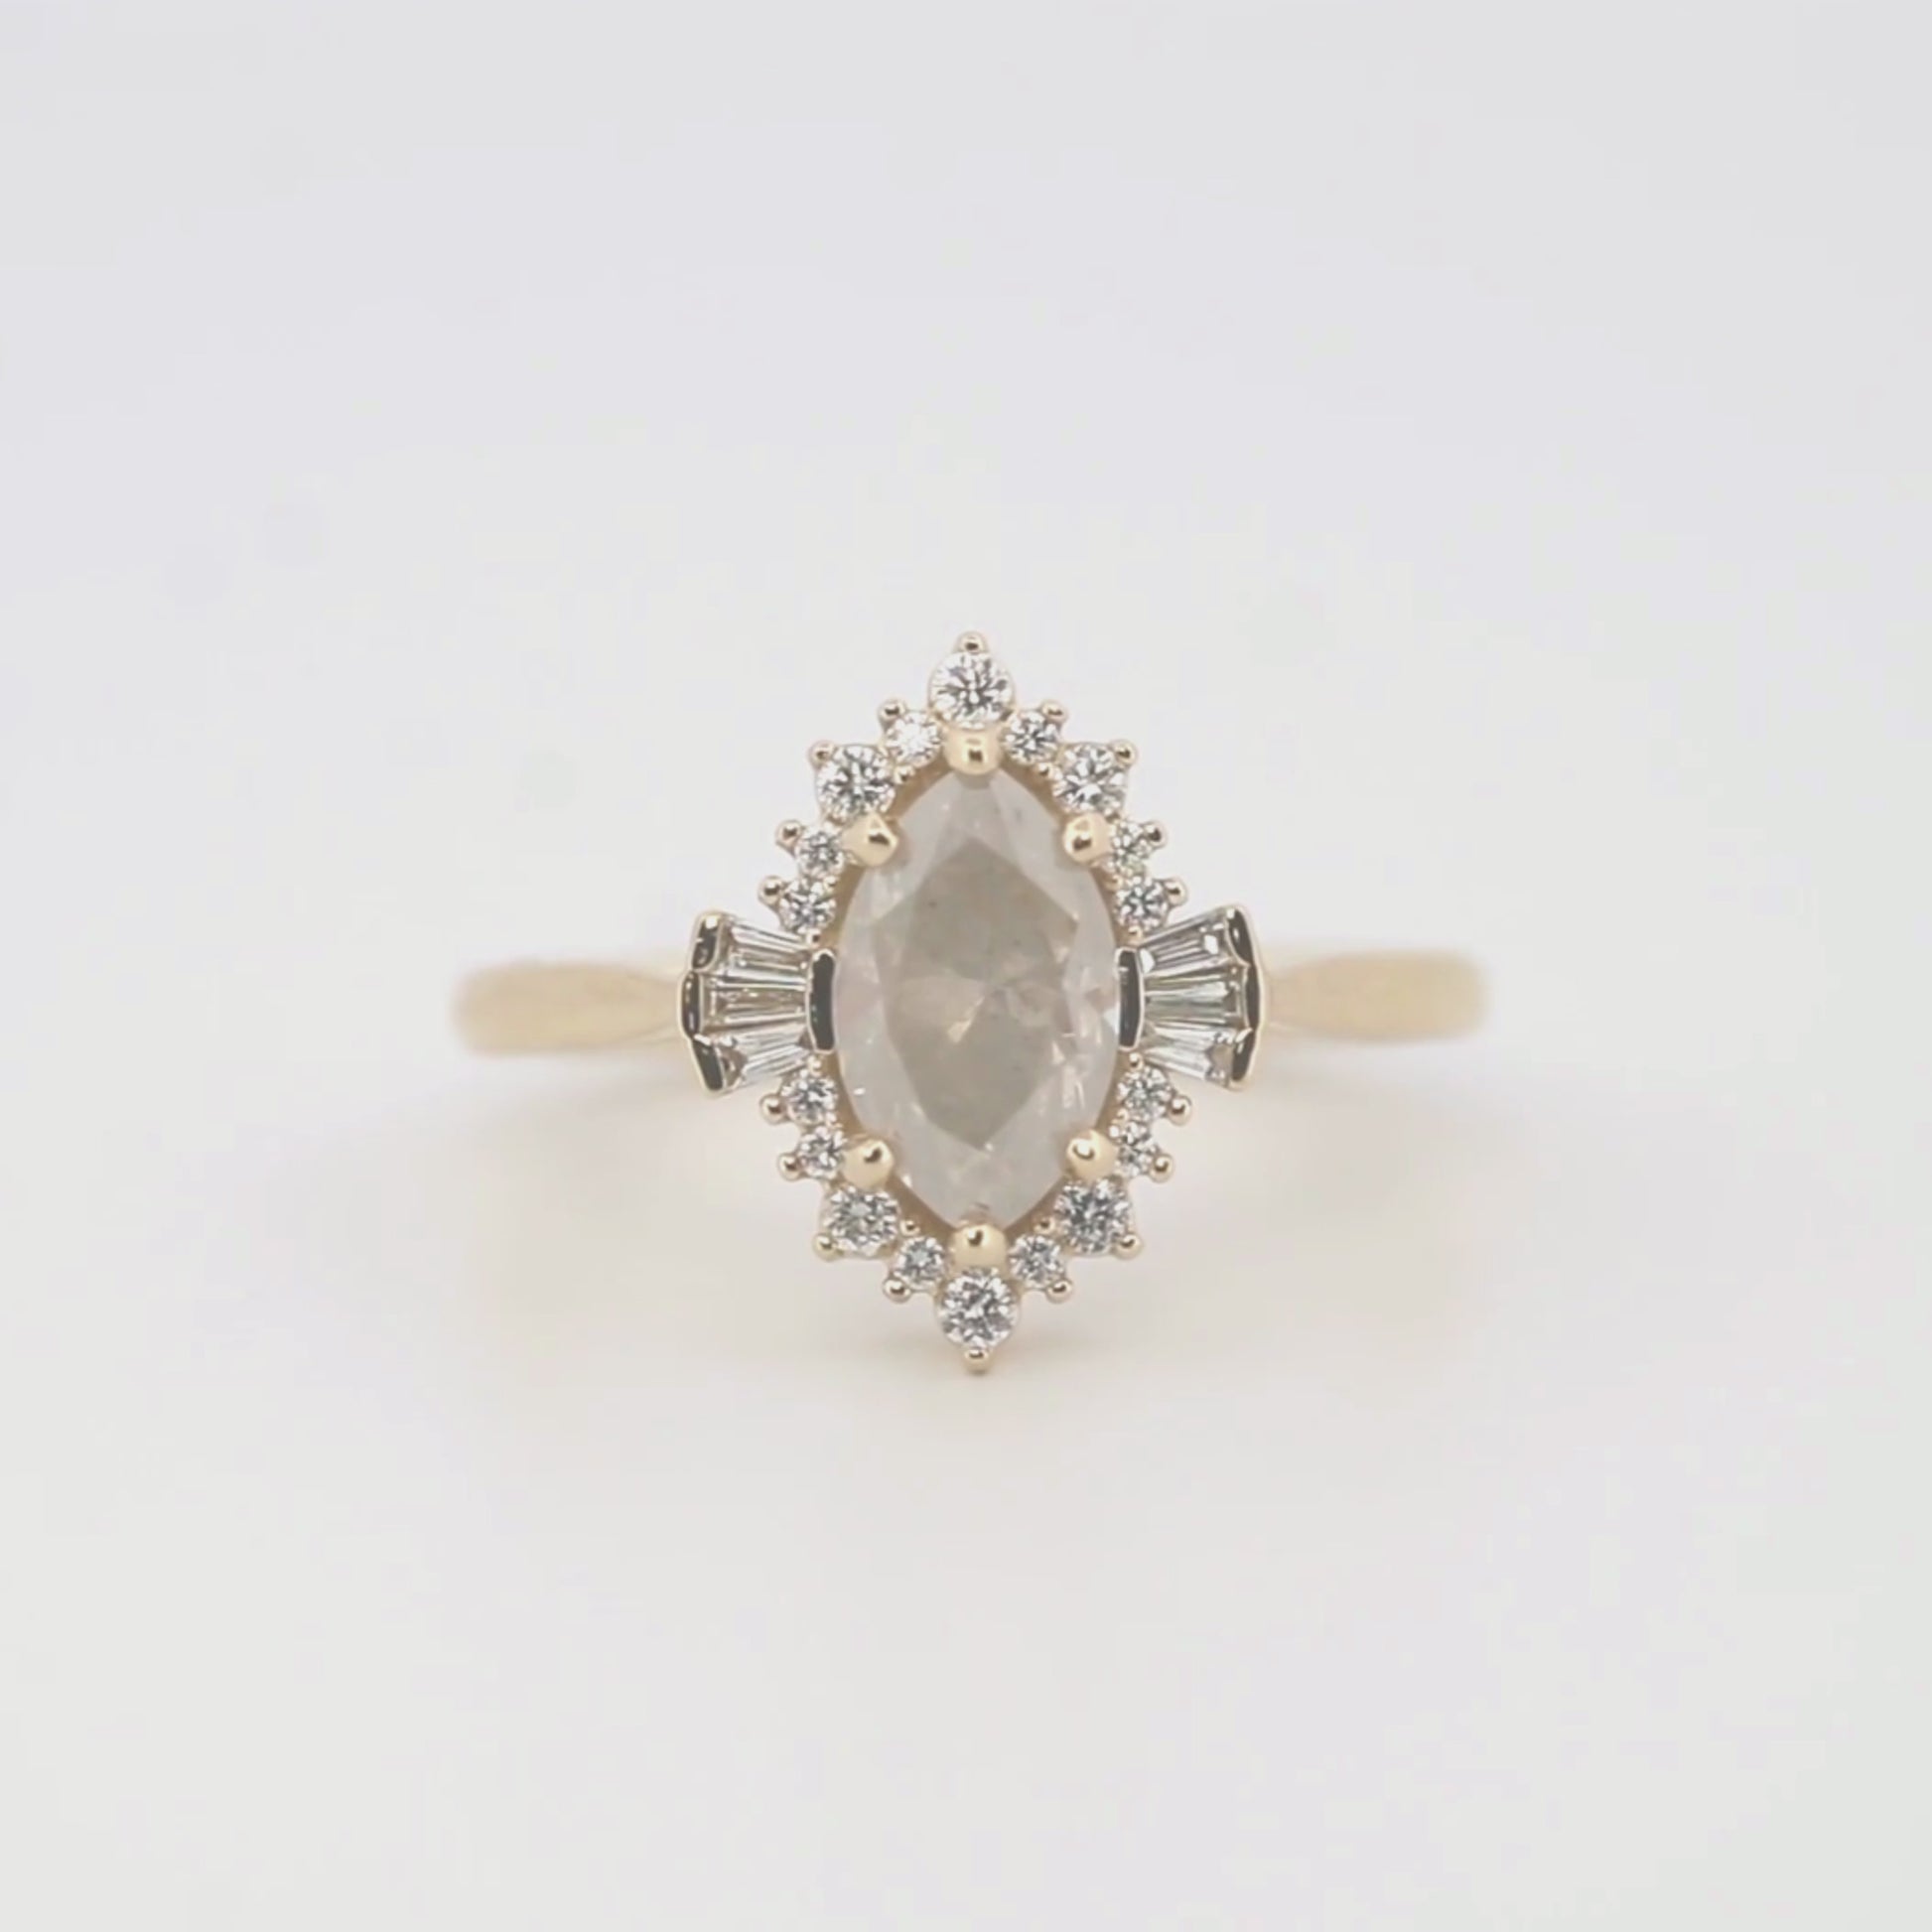 Meghan Ring with a 1.40 Carat Misty Gray Marquise Salt and Pepper Diamond and White Accent Diamonds in 14k Yellow Gold - Ready to Size and Ship